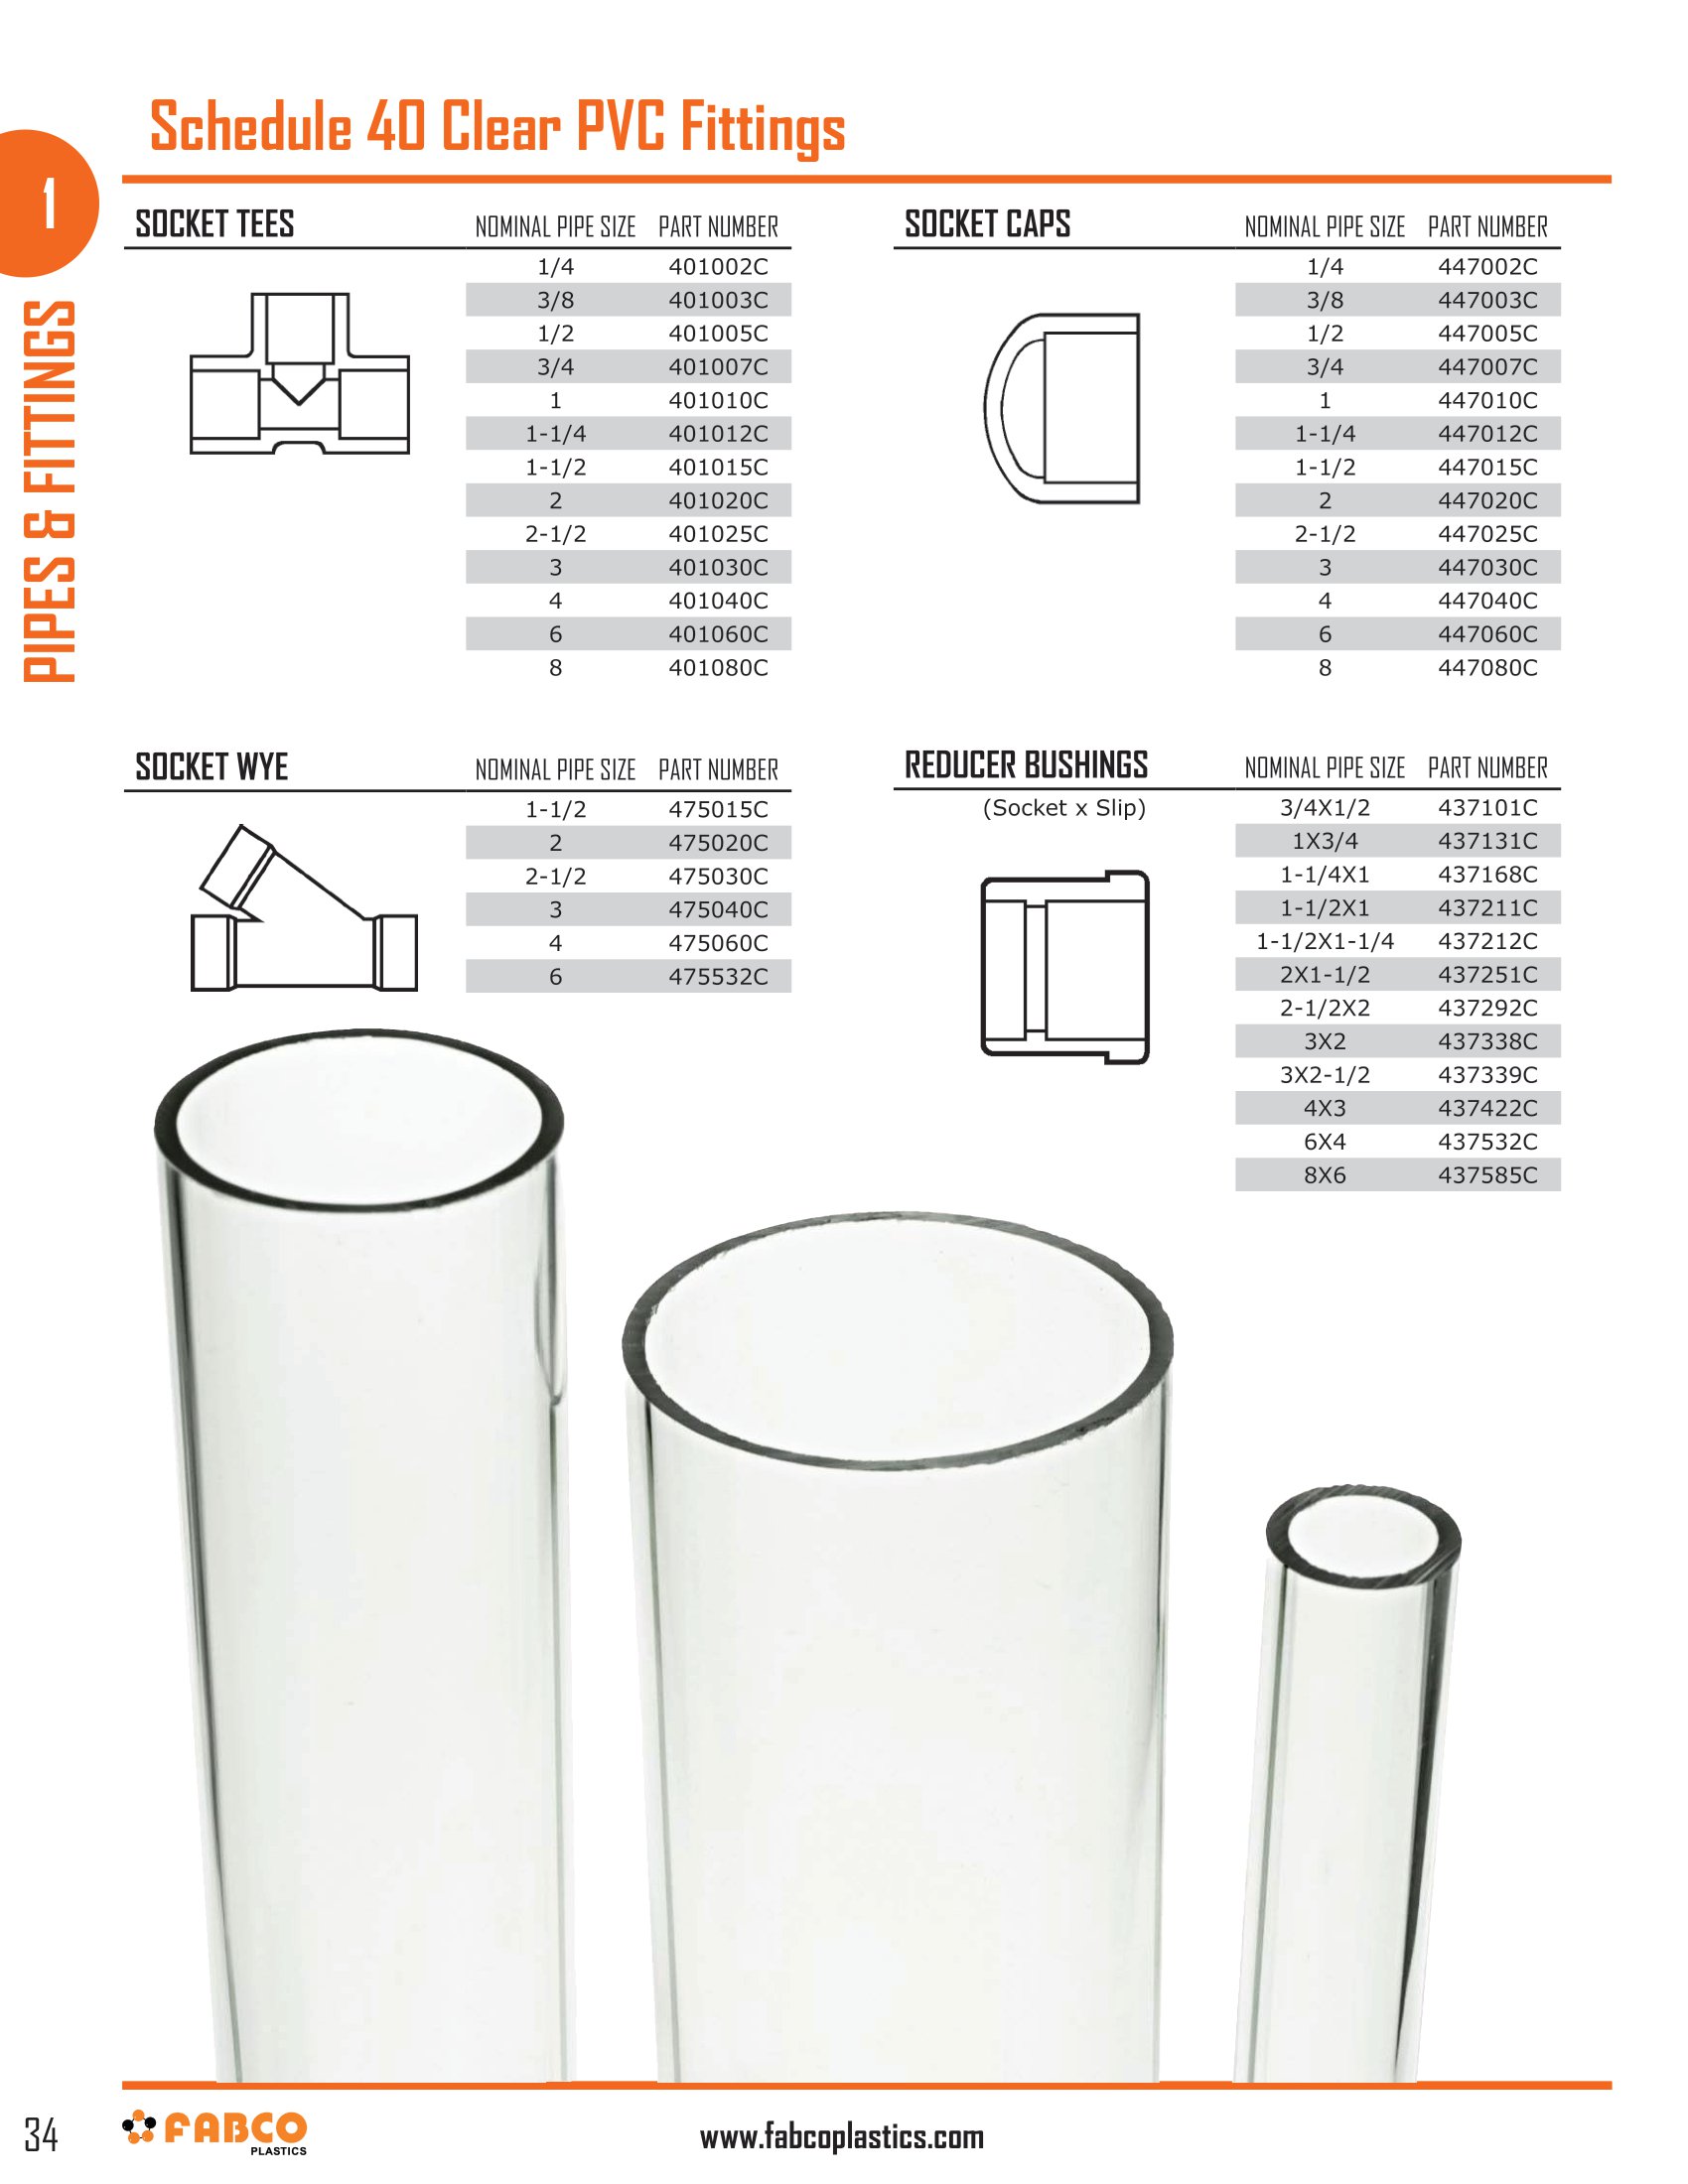 Schedule 40 Clear PVC Fittings